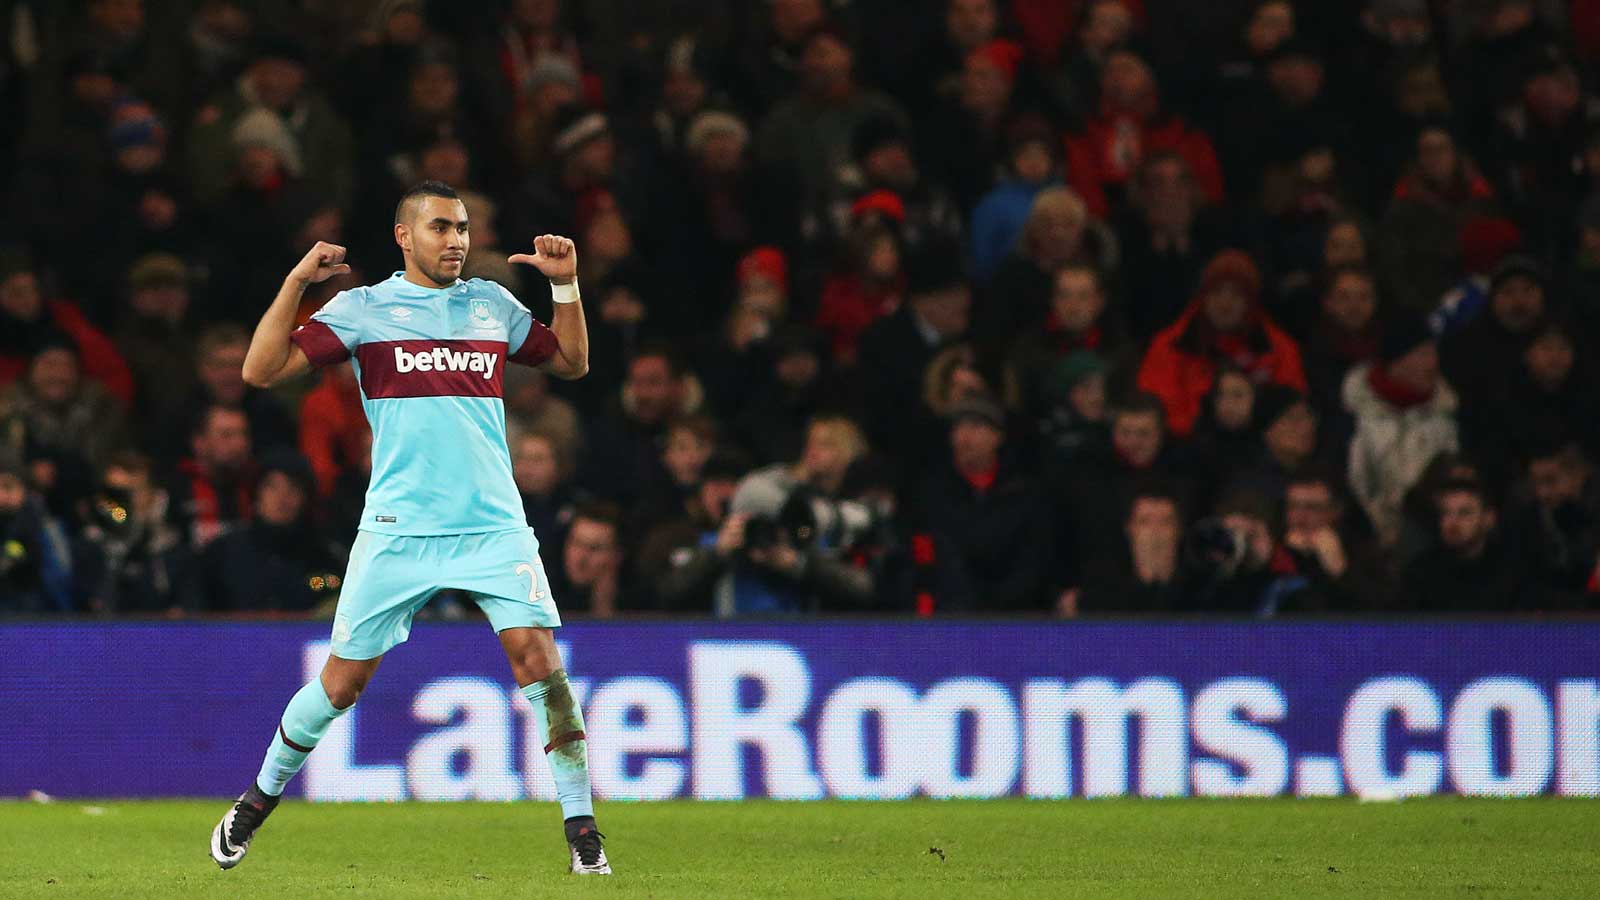 Dimitri Payet celebrates his goal against Bournemouth in January 2016